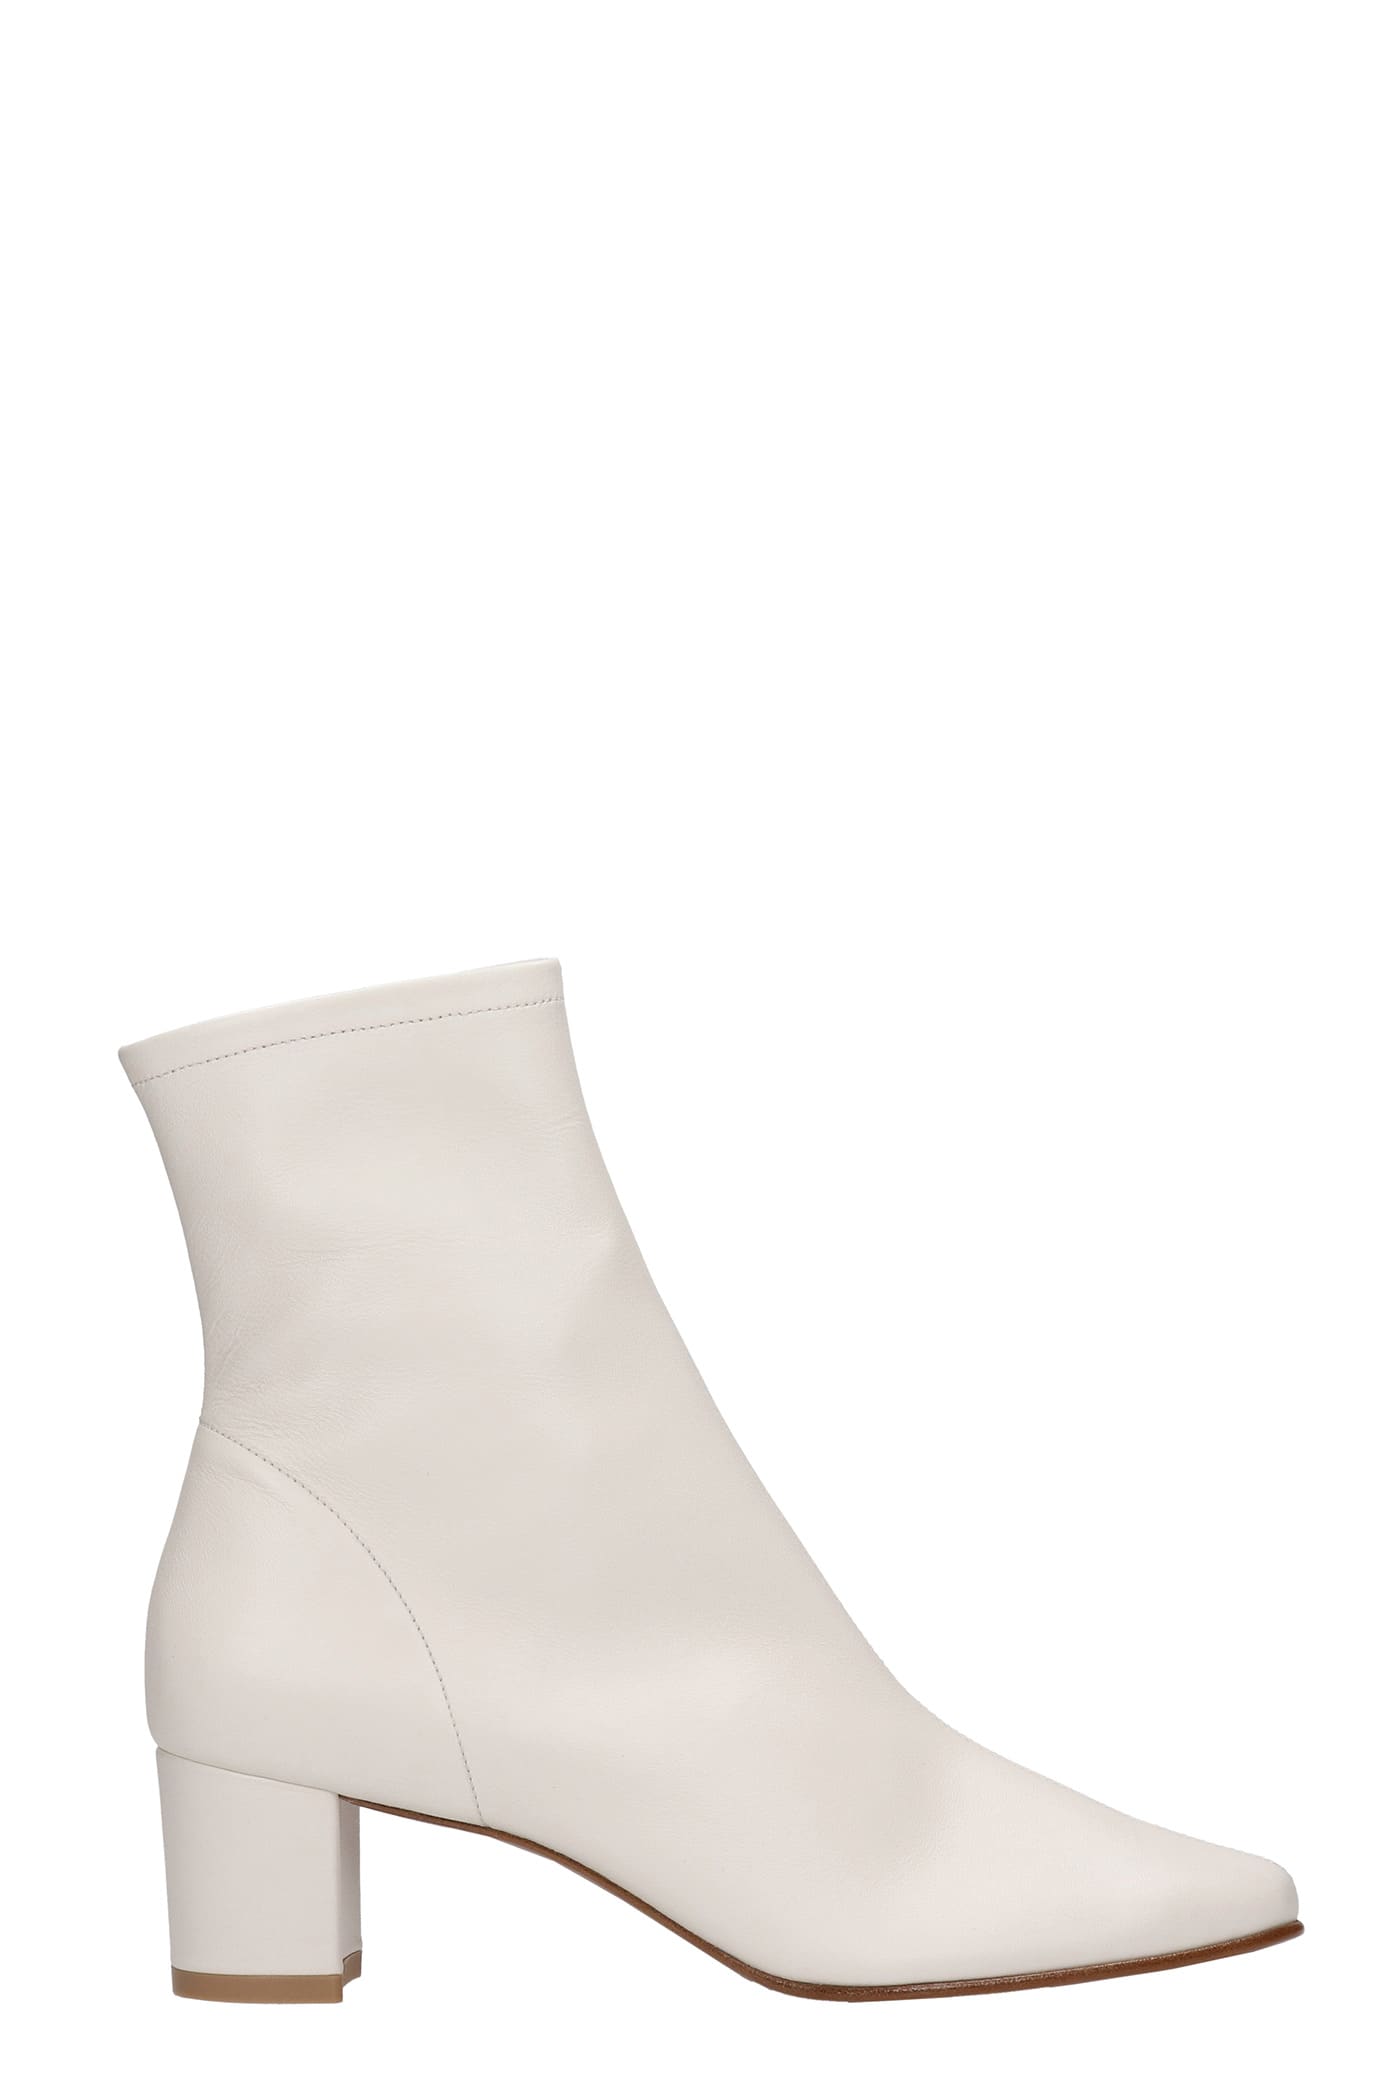 BY FAR Sofia Low Heels Ankle Boots In White Leather